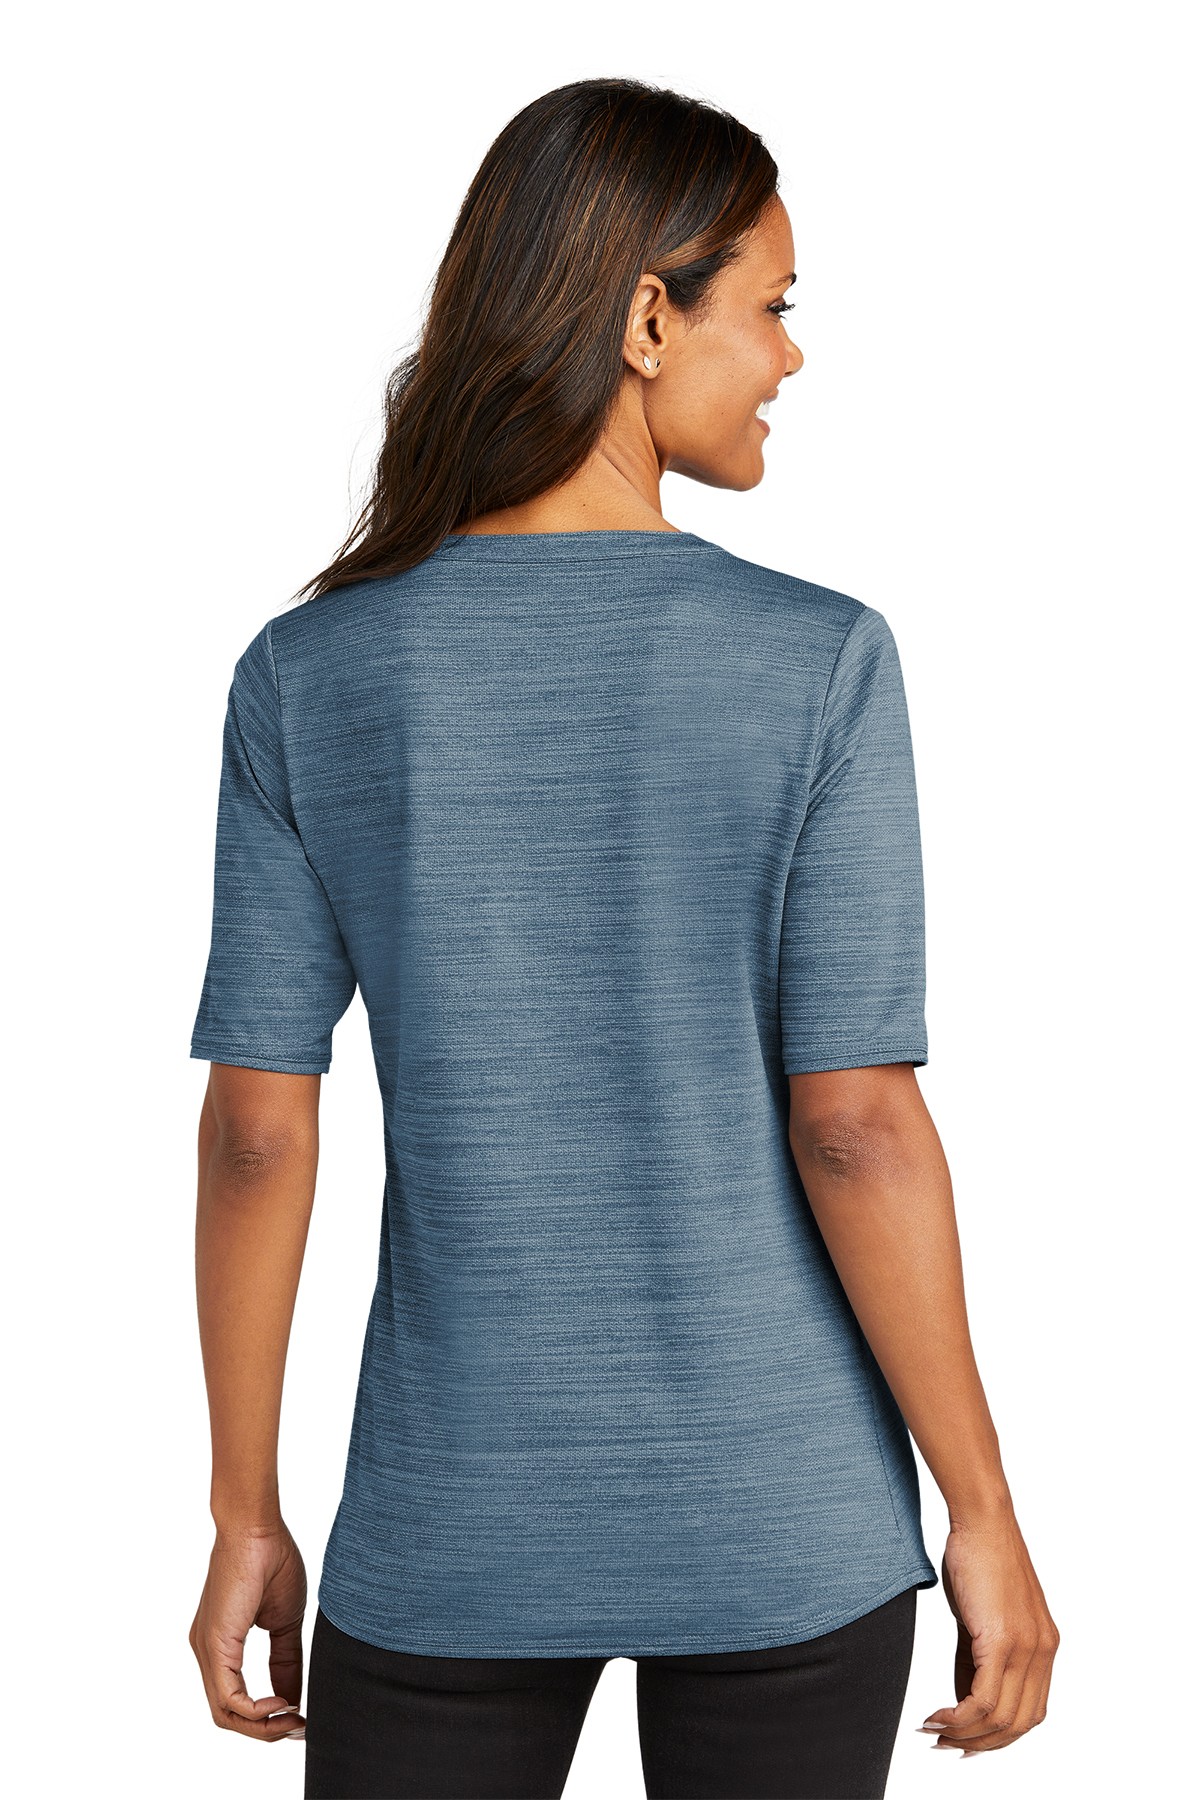 Port Authority Ladies Stretch Heather Open Neck Top, Product